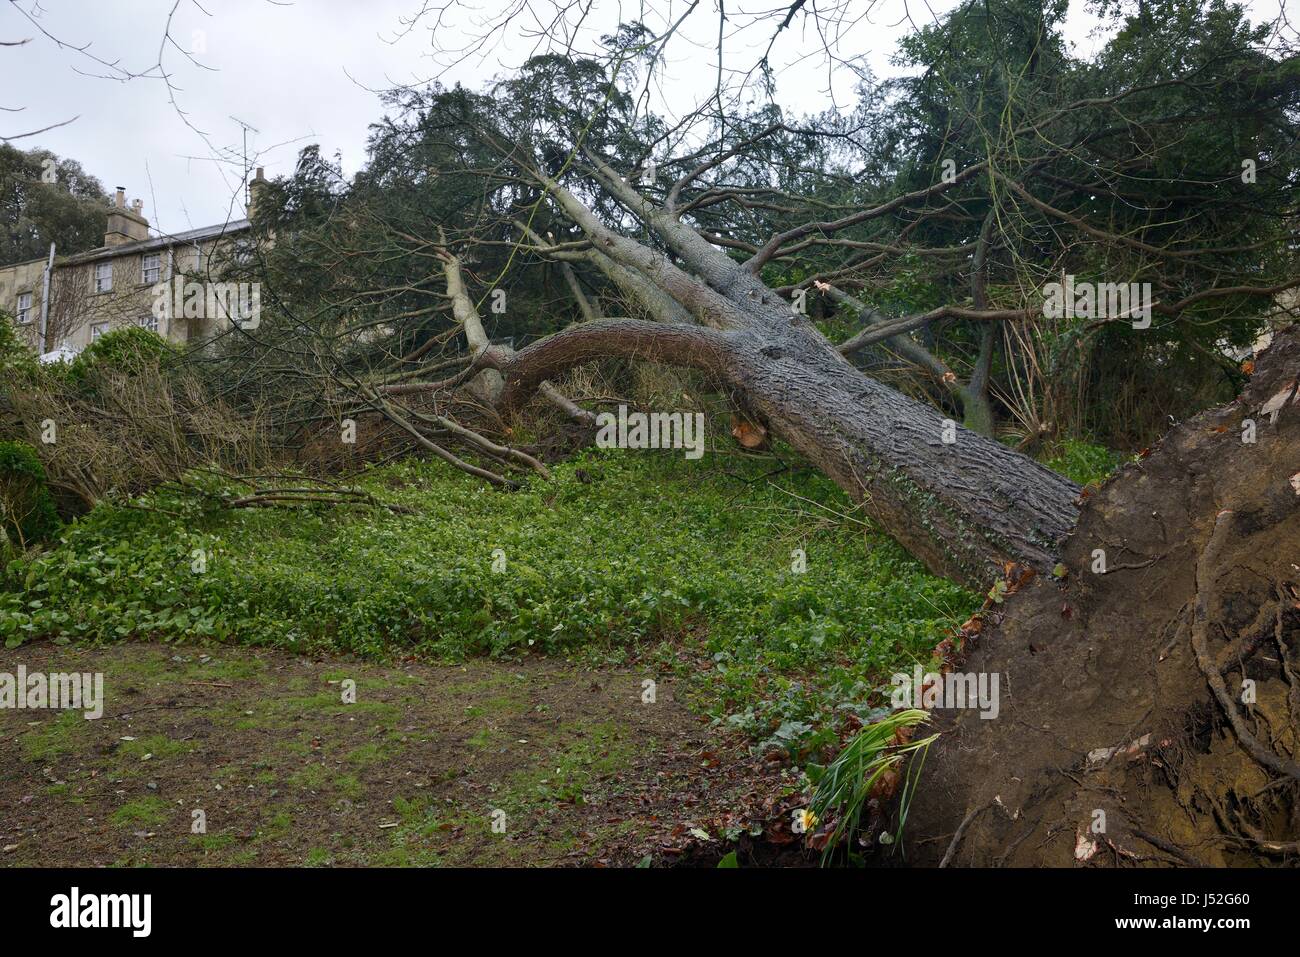 Deodar cedar tree (Cedrus deodara) blown down in a storm, leaning against a house, Wiltshire UK, March 2016. Stock Photo